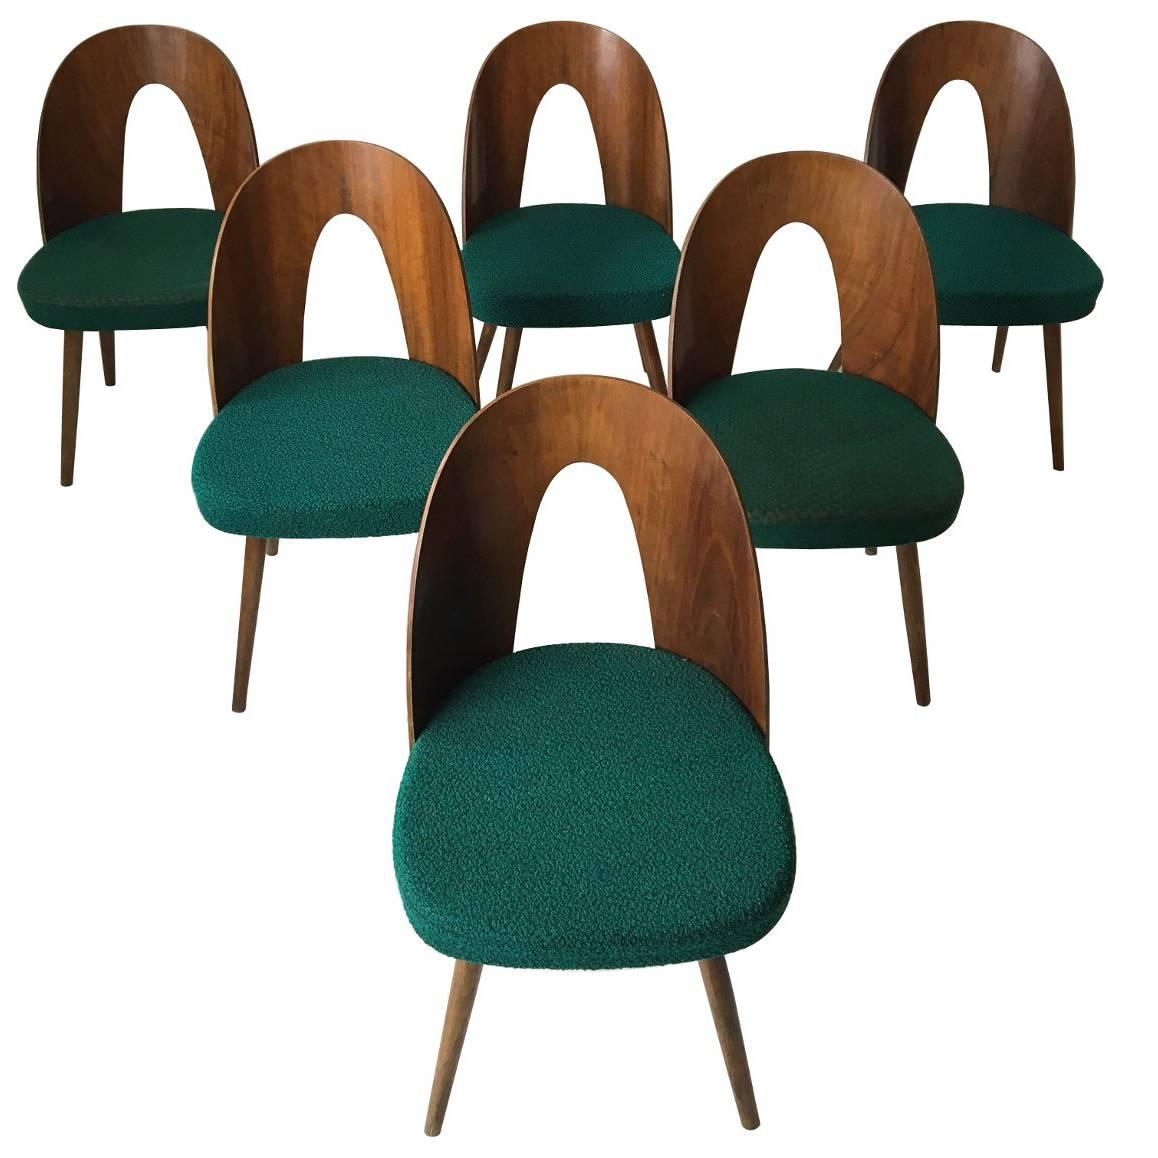 Set of Six Most Green Dining Room Chairs by Antonin Suman for Zilina. SALE!